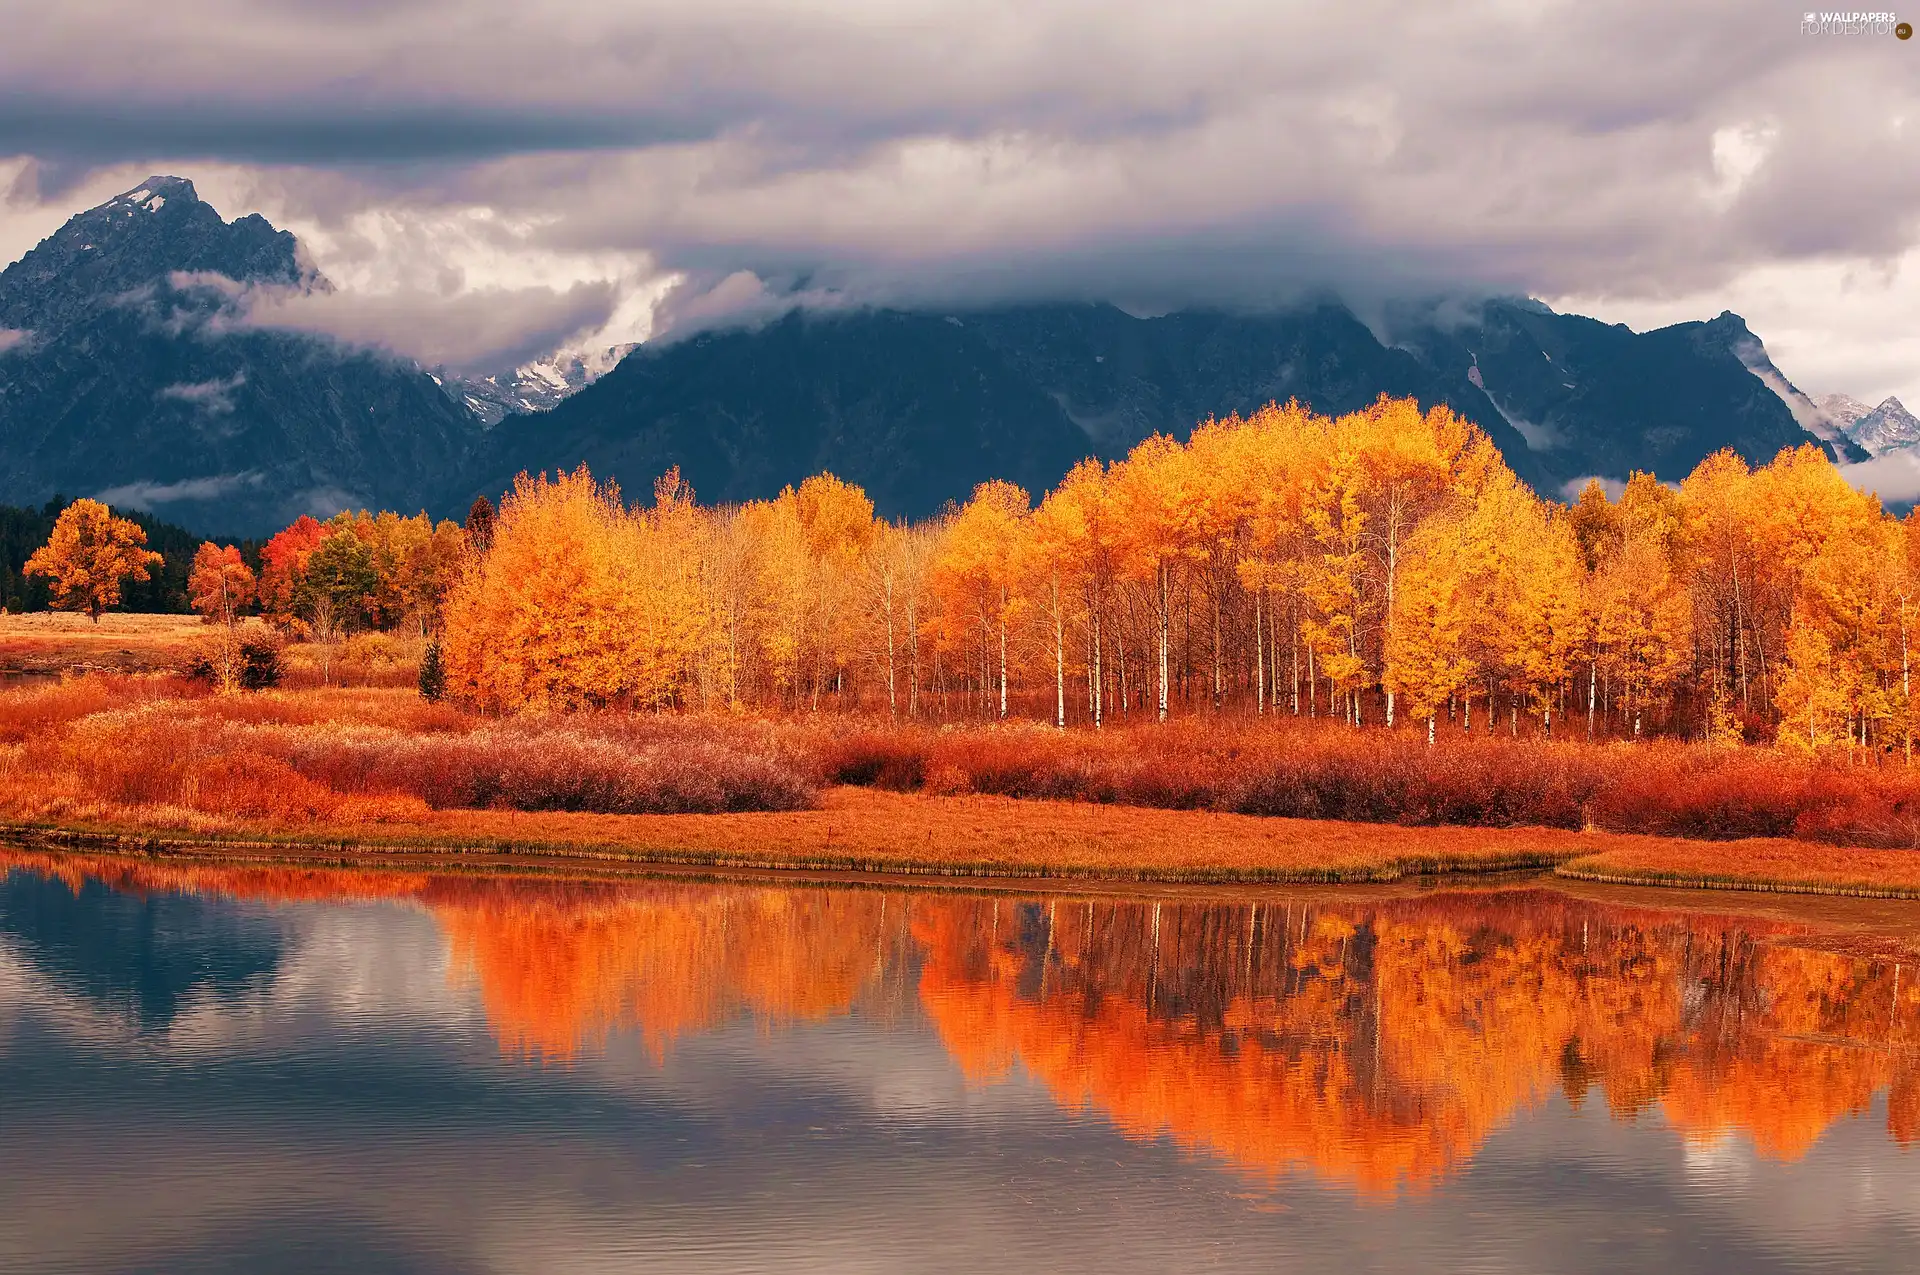 viewes, River, Orange, trees, Mountains - For desktop wallpapers: 2560x1700